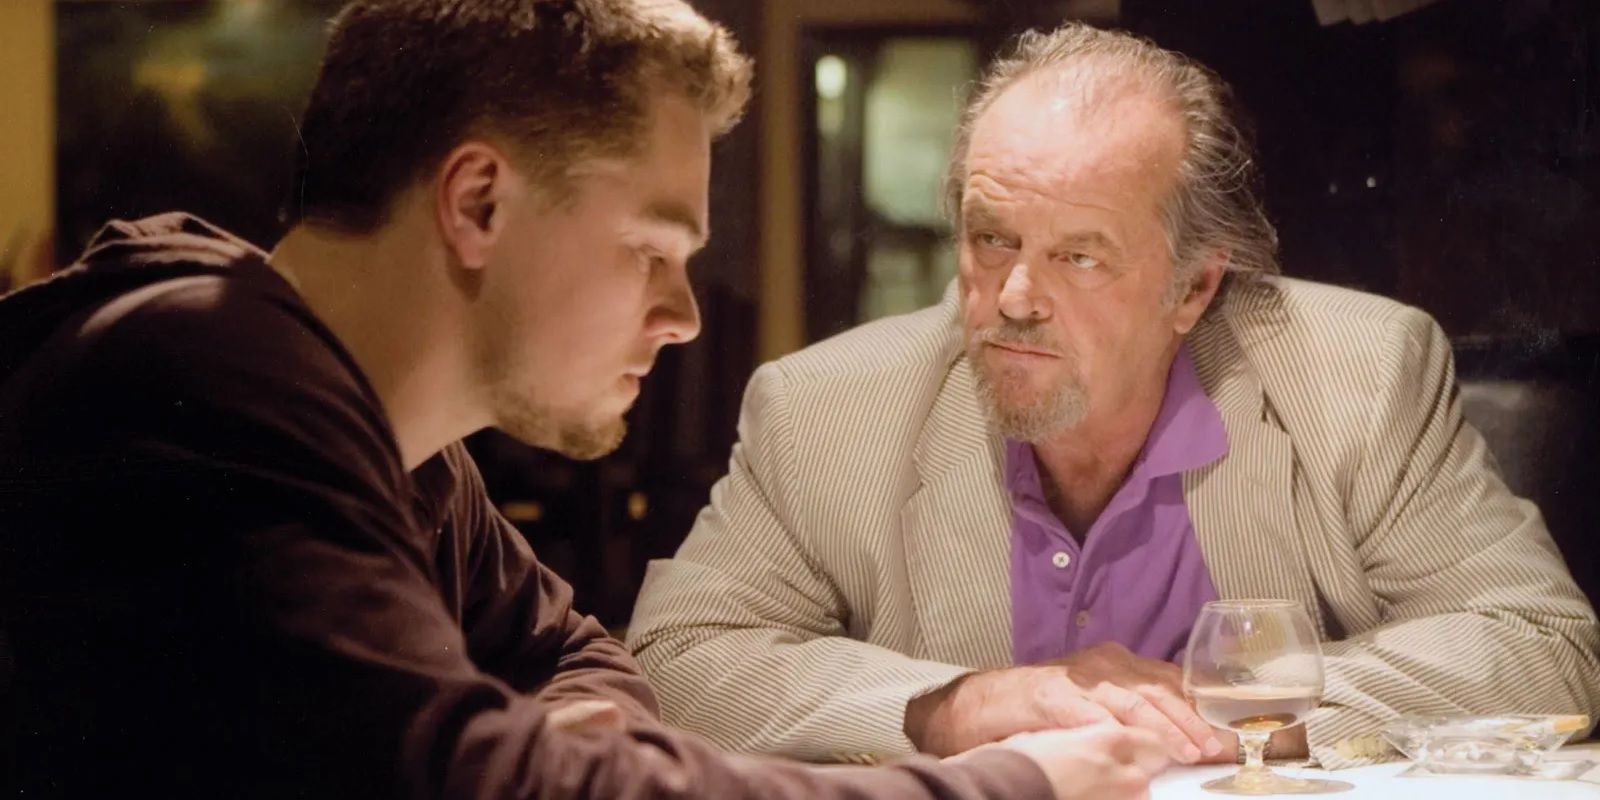 Leonardo DiCaprio sitting across from Jack Nicholson in The Departed